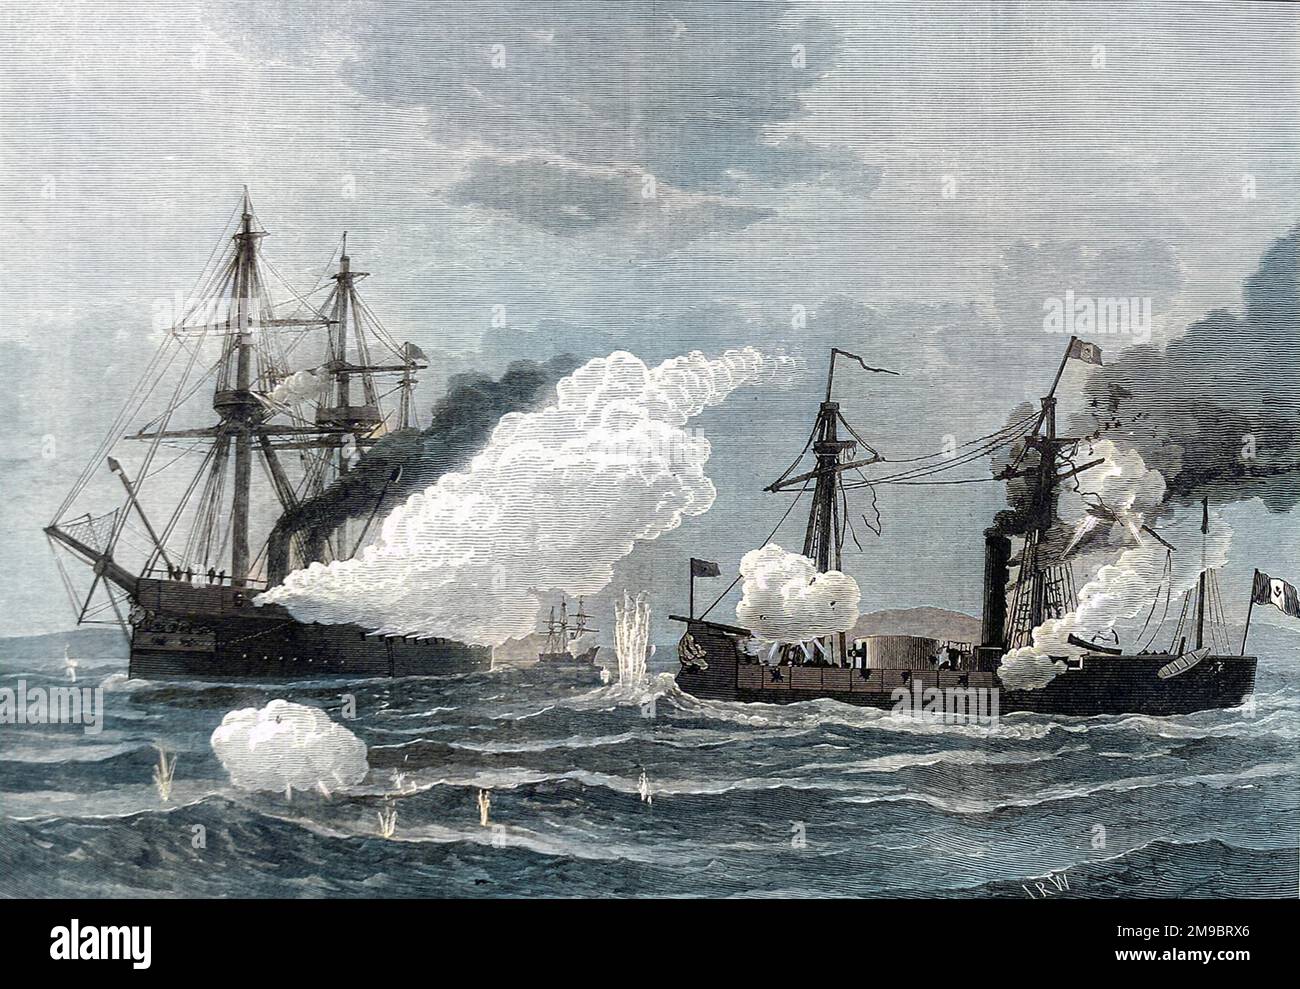 The battle between HMS 'Shah' and 'Amethyst' and the Peruvian Ironclad turret ship 'Huascar' on the 29th May 1877. The 'Huascar' had been taken over by some Peruvian revolutionaries and declared a 'pirate' by the Peruvian government. The 'Shah' and 'Amethyst' were ordered to protect British Merchant Shipping and after the 'Huascar' had stopped several British merchant ships, the Royal Navy decided to hunt down the 'Huascar'.  In the action depicted, the 70 guns of the British ships were unable to do much damage to the 'Huascar' as she was an heavily-built ironclad. In return the gunnery crew Stock Photo